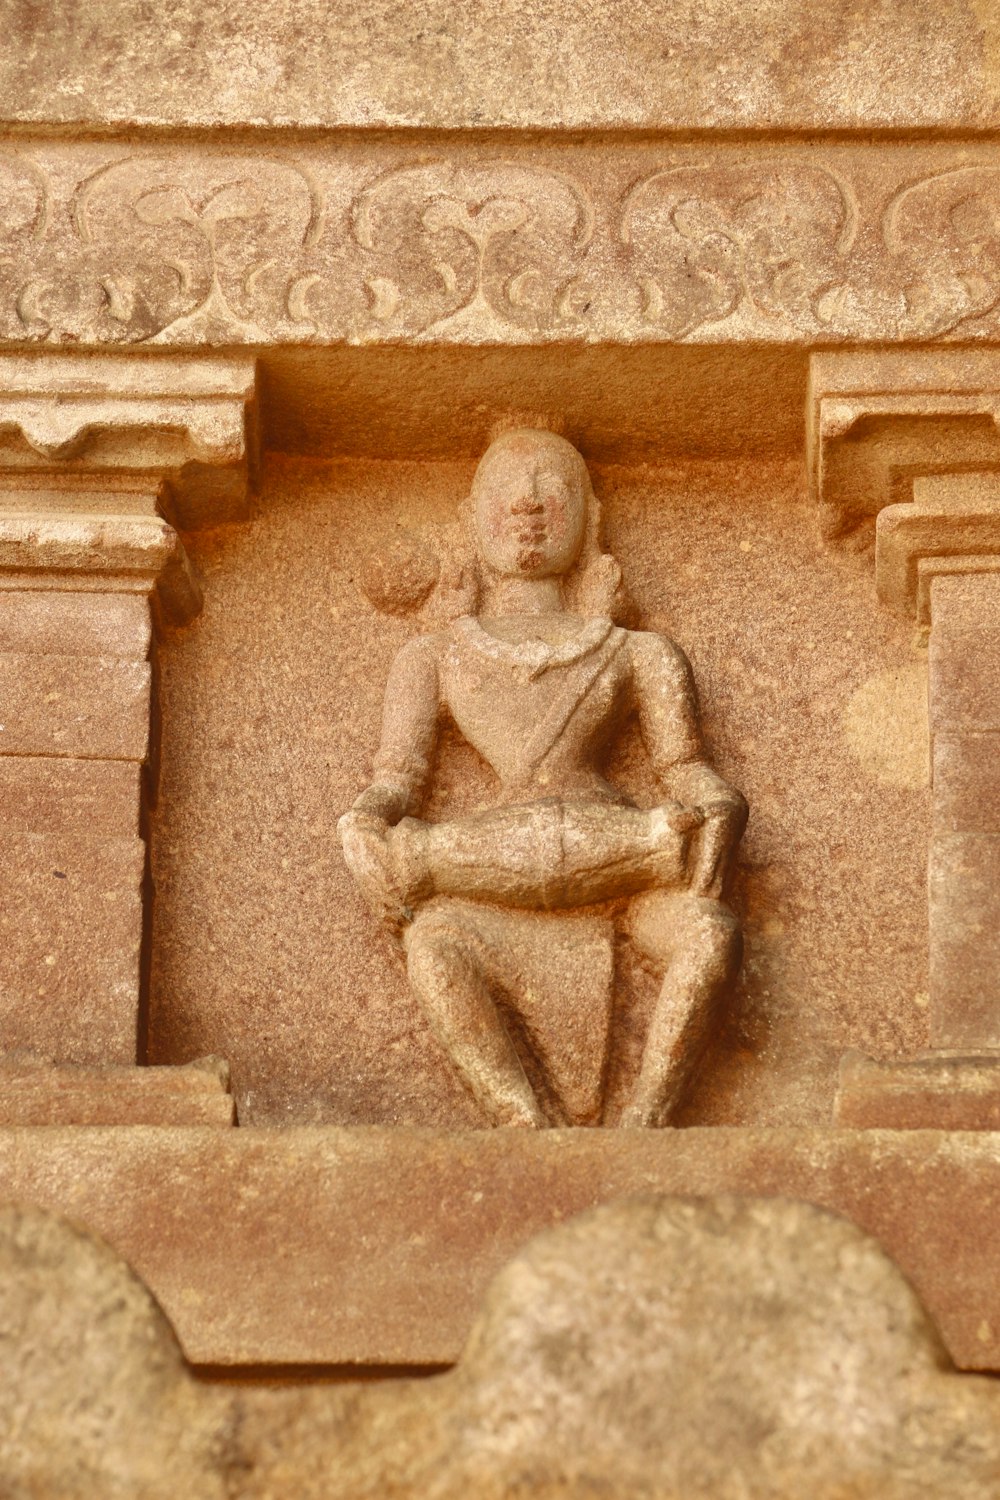 a statue of a man sitting on a ledge